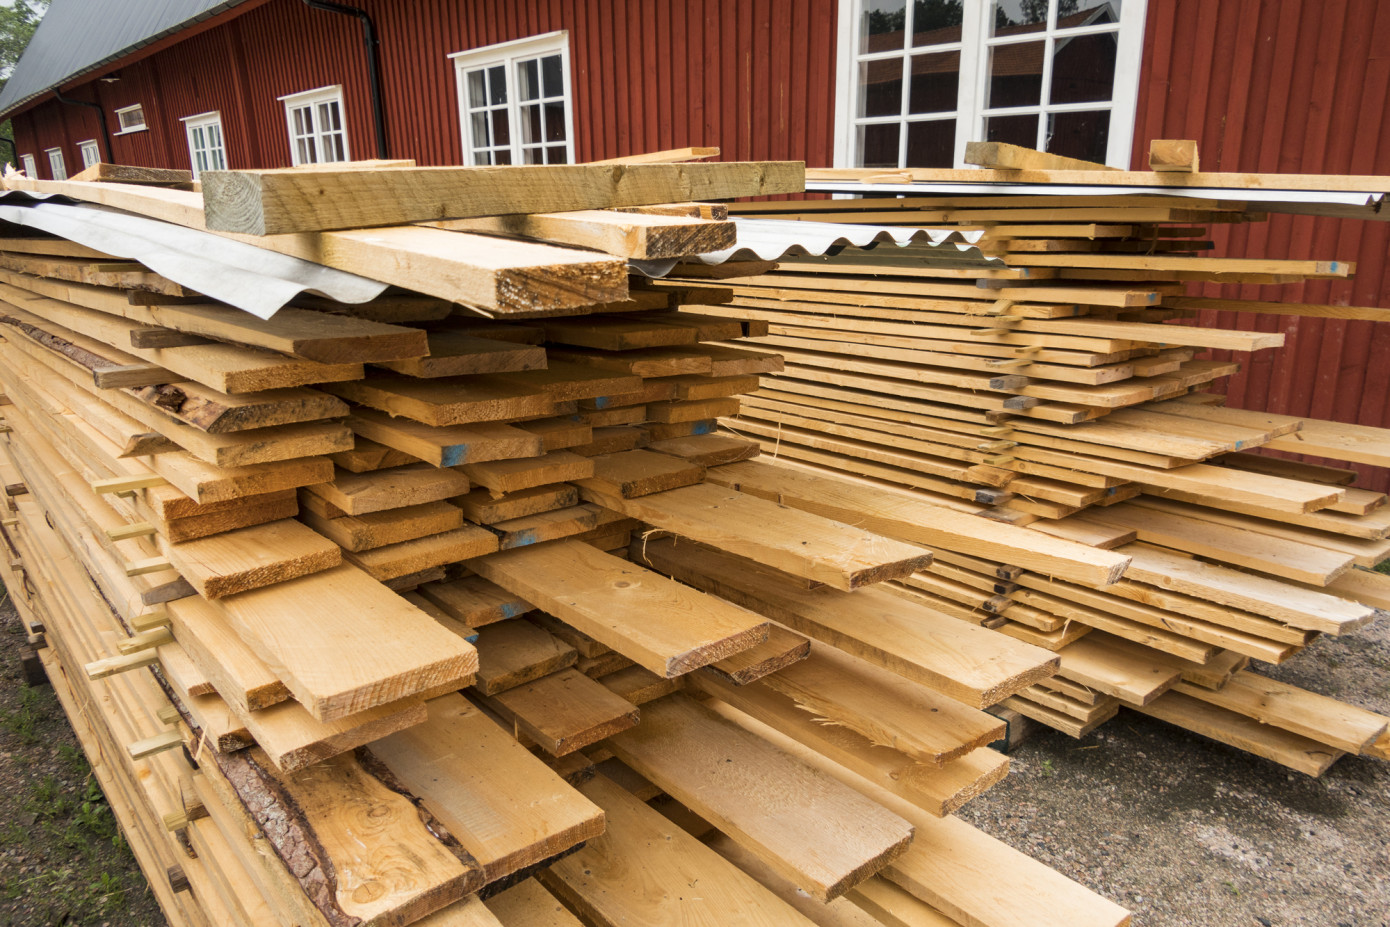 With weak global demand, US become safe harbor for Swedish lumber exporters